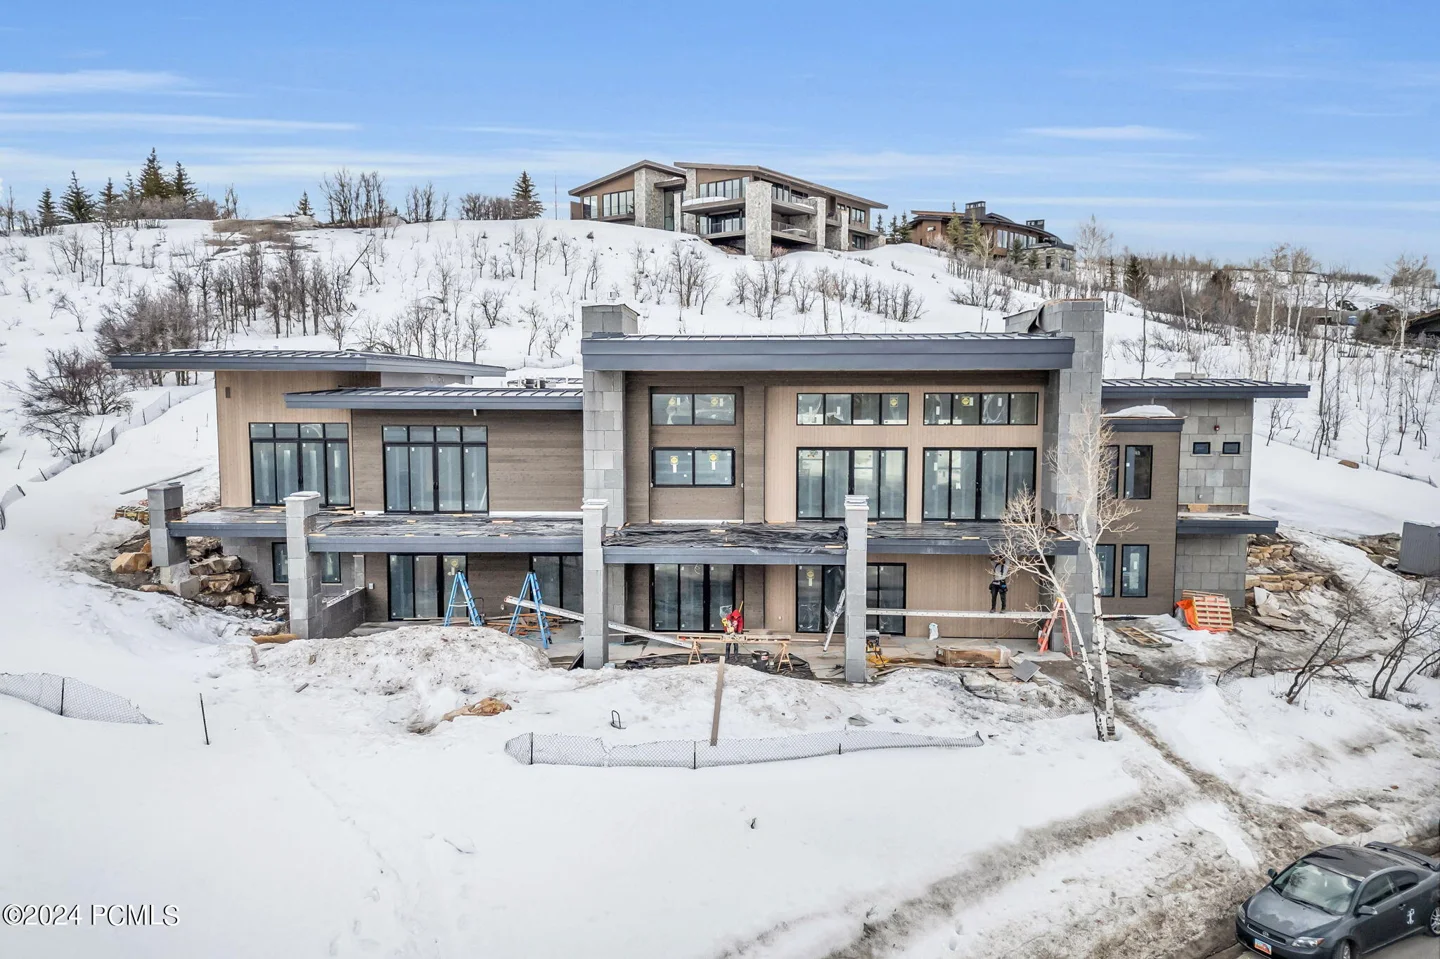 New Construction in Aspen Camp Sub-division of Promontory